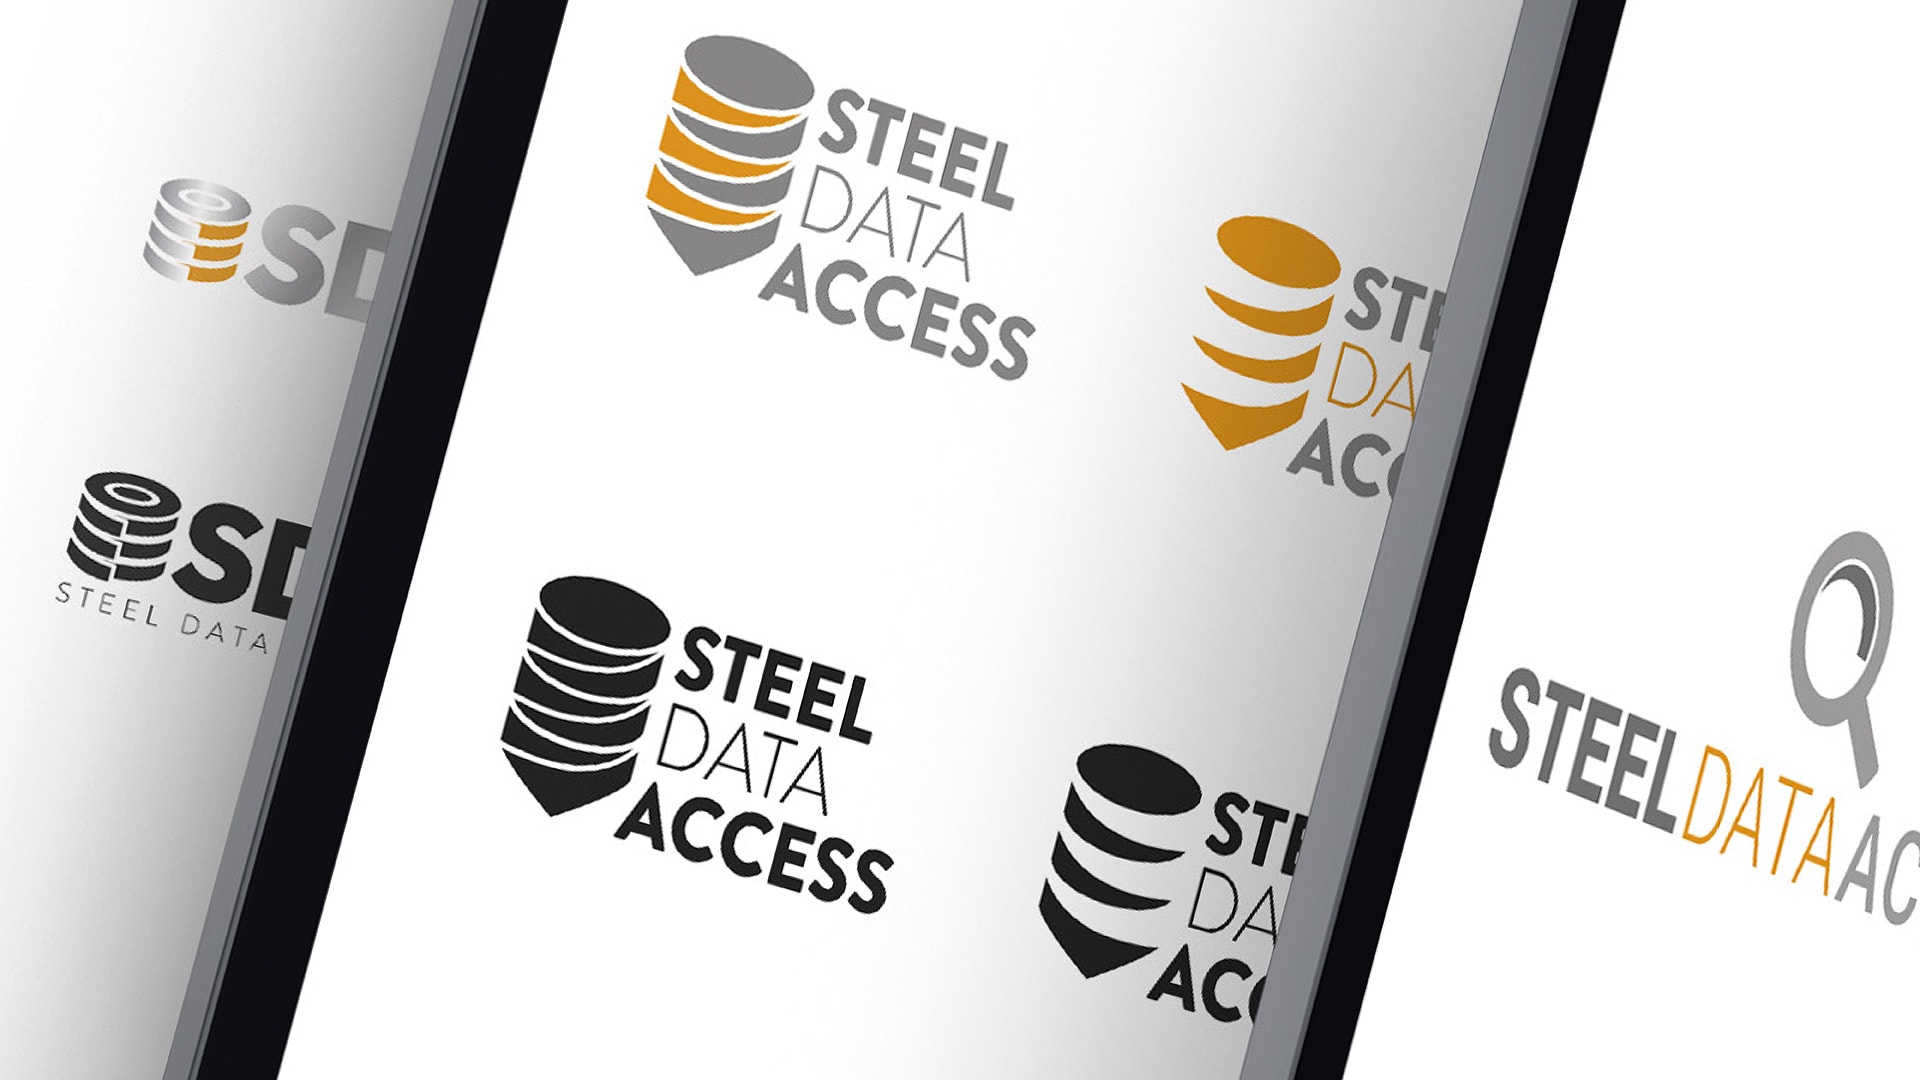 A close-up of a mobile phone displaying the Steel Data Access logo designs.